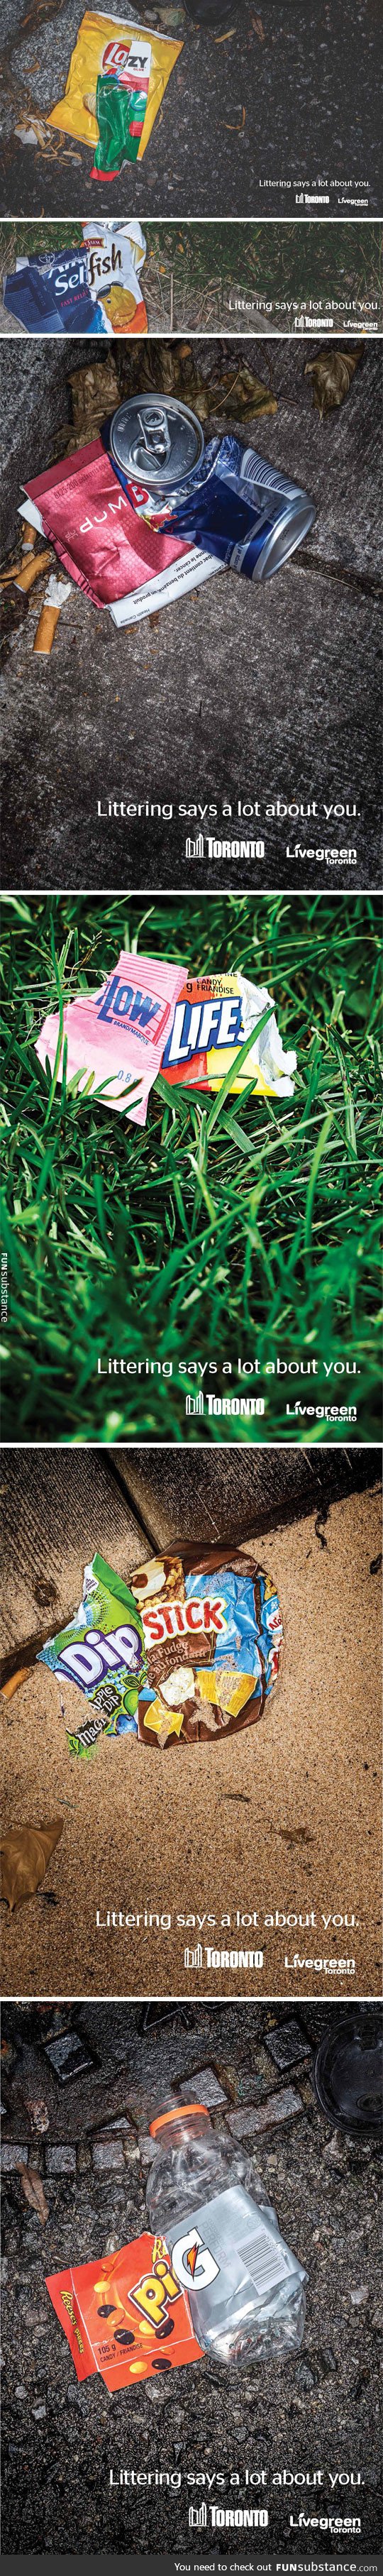 Littering, it says a lot about you